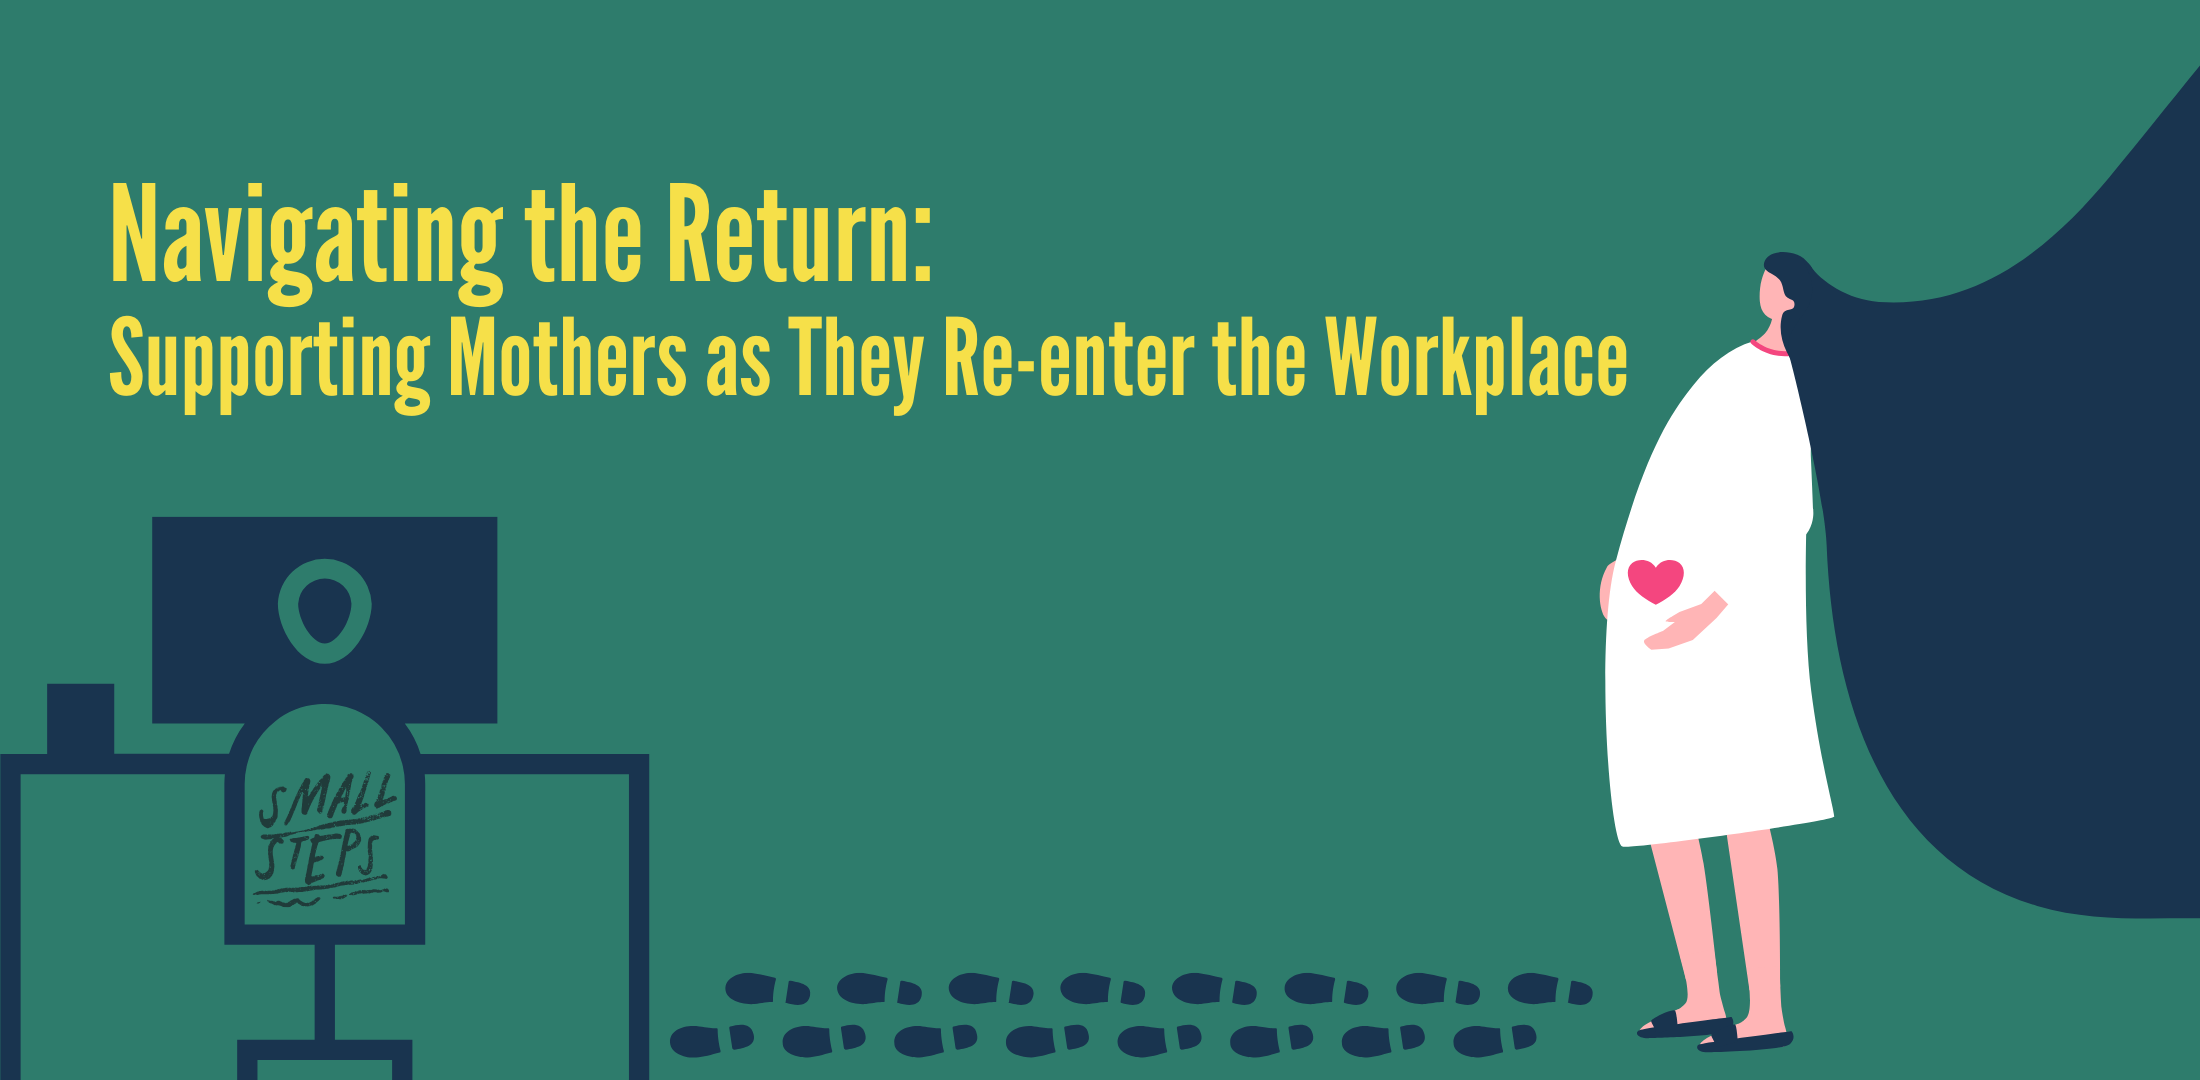 Navigating the Return: Supporting Mothers as They Re-enter the Workplace